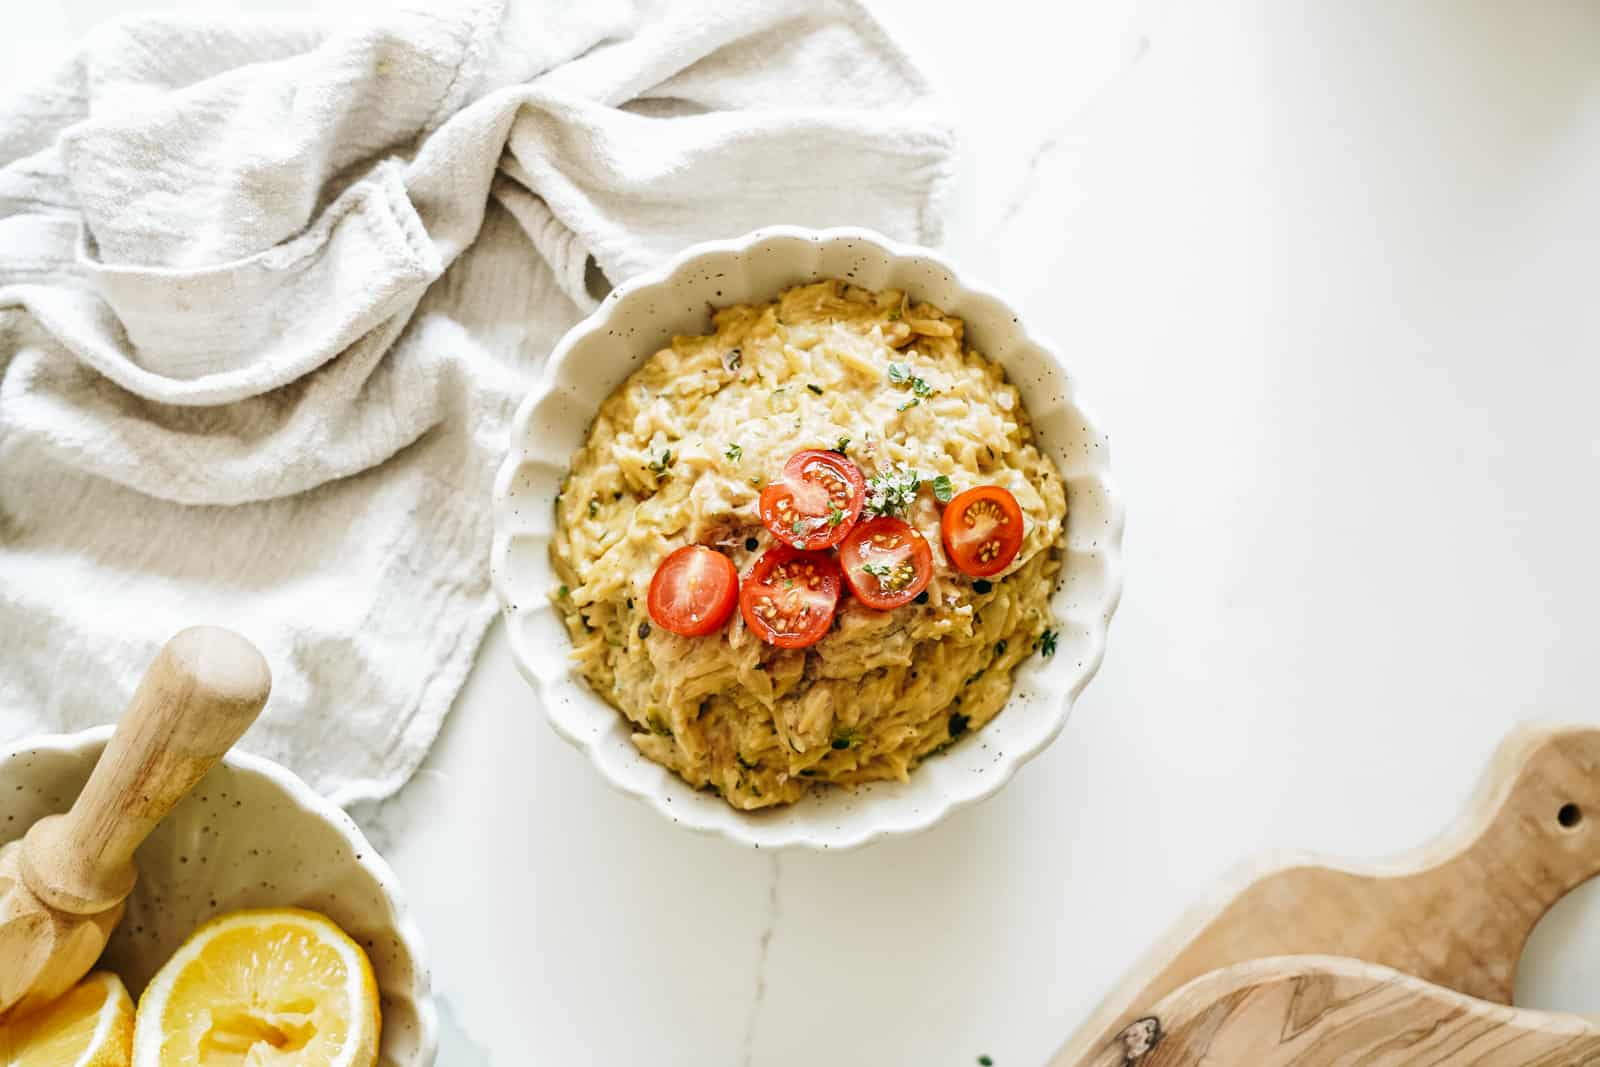 One of the many vegan comfort food recipes - creamy orzo - in a bowl.